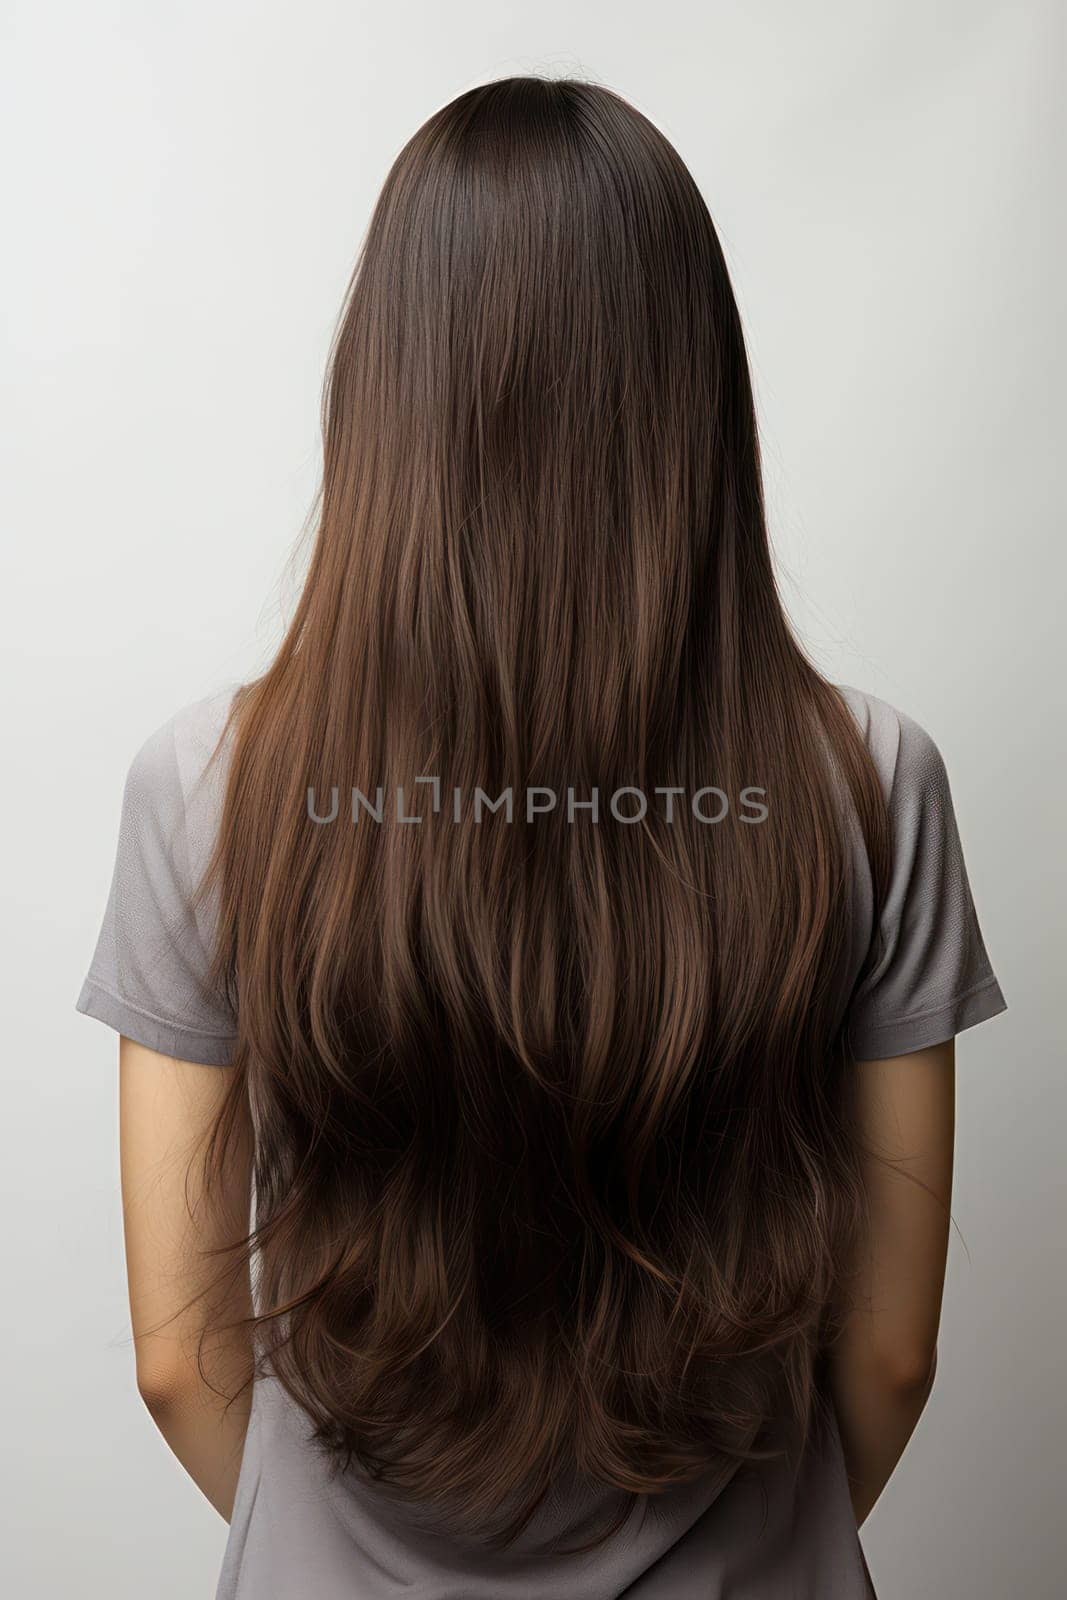 Elegant Back View of a Young Female Model with Long, Straight Hair in a White Studio